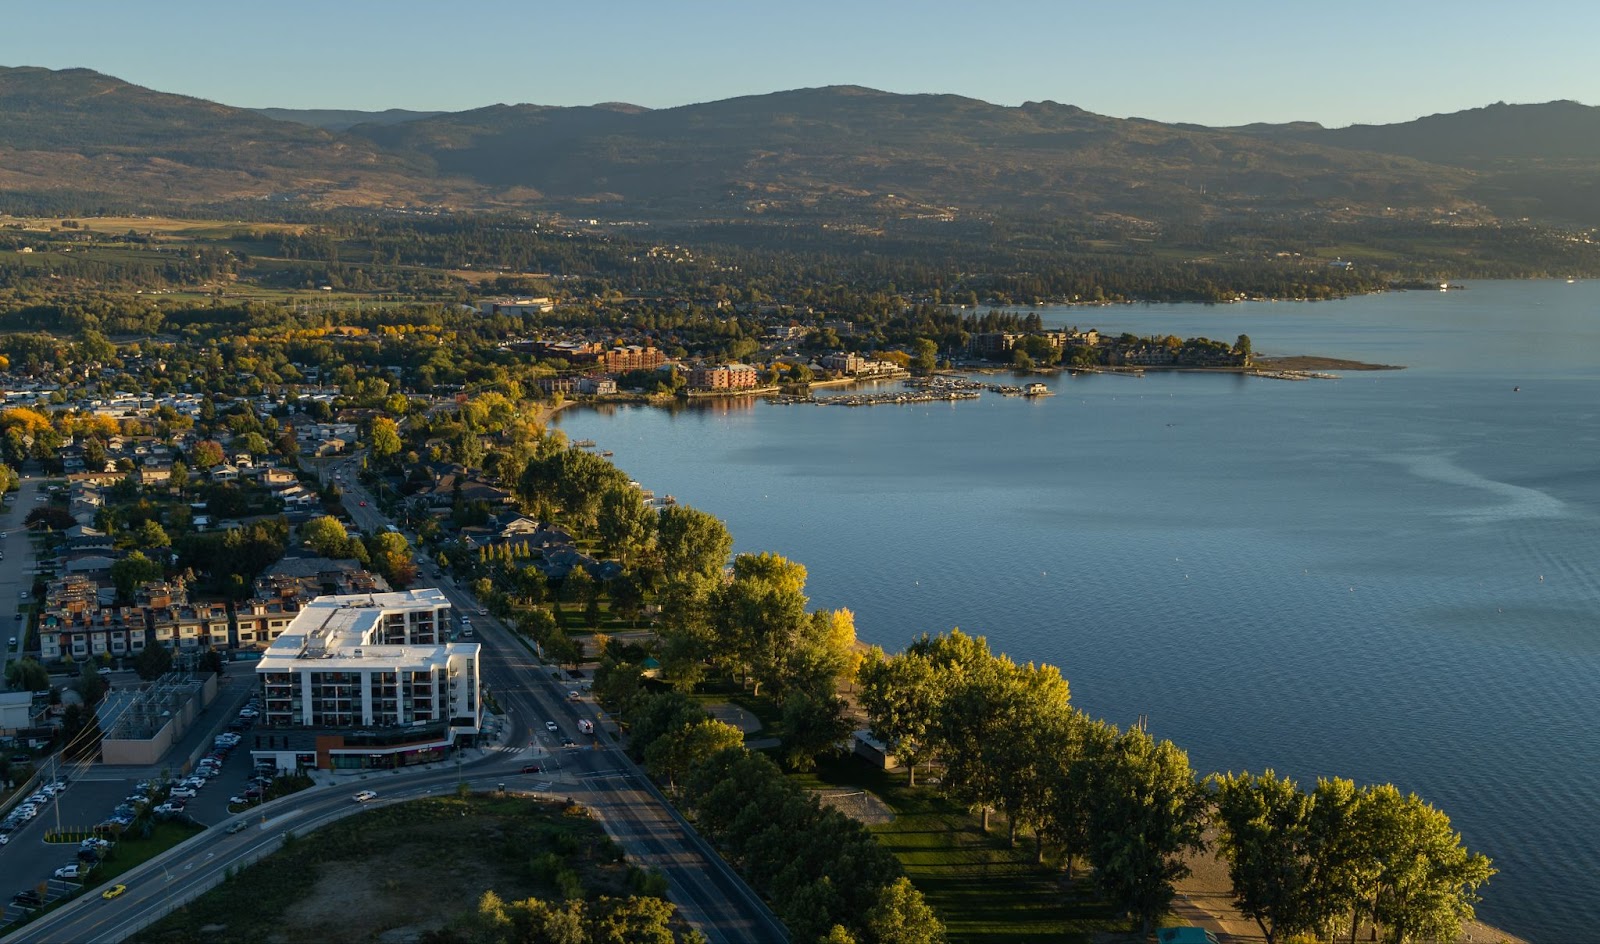 a birds-eye view of The Shore Kelowna, with the Okanagan Lake and mountains in the background